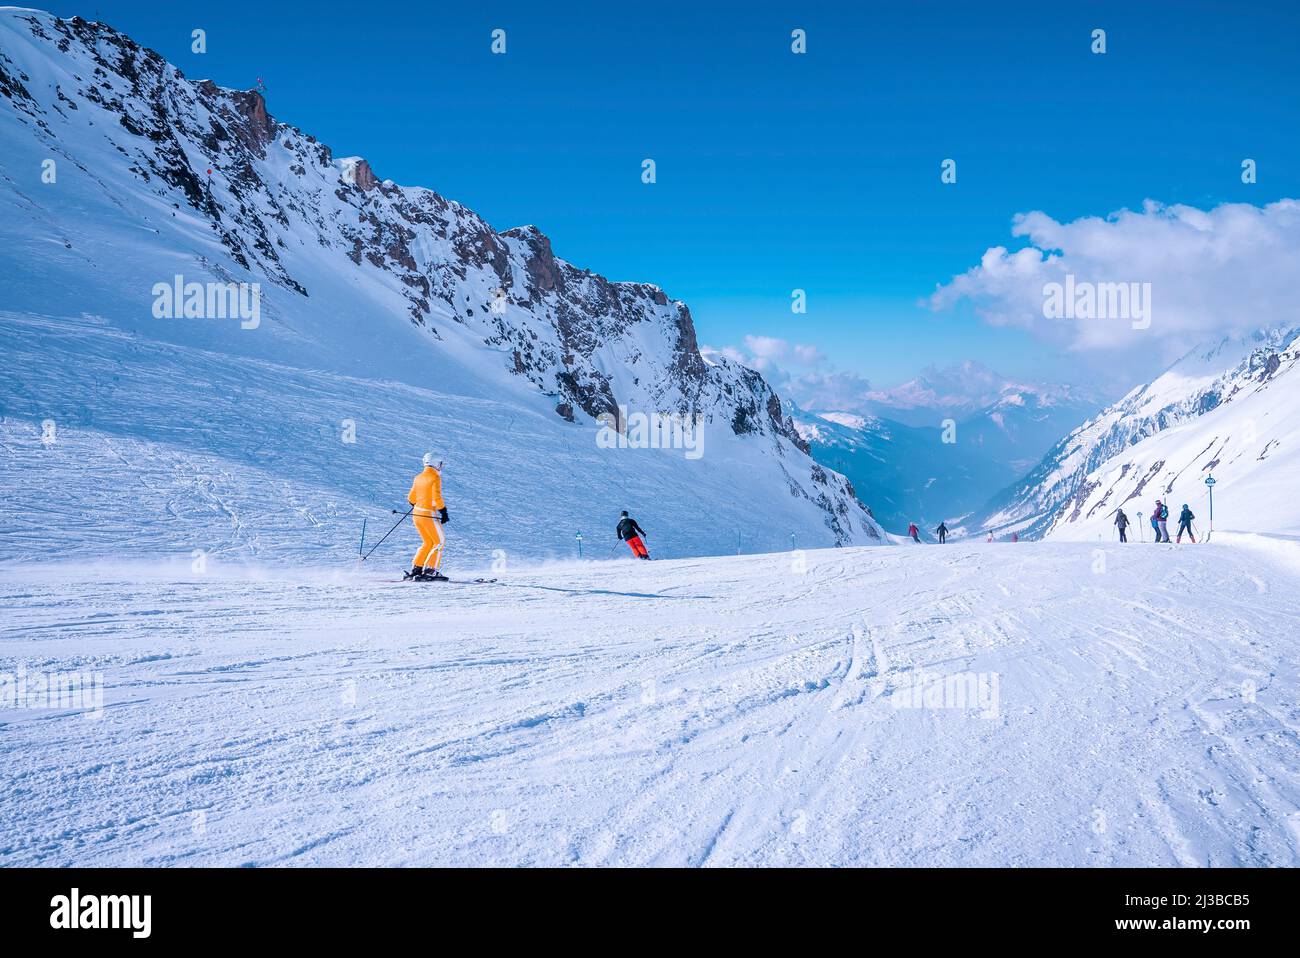 Skiers sliding down snowy slope on mountain at winter resort Stock